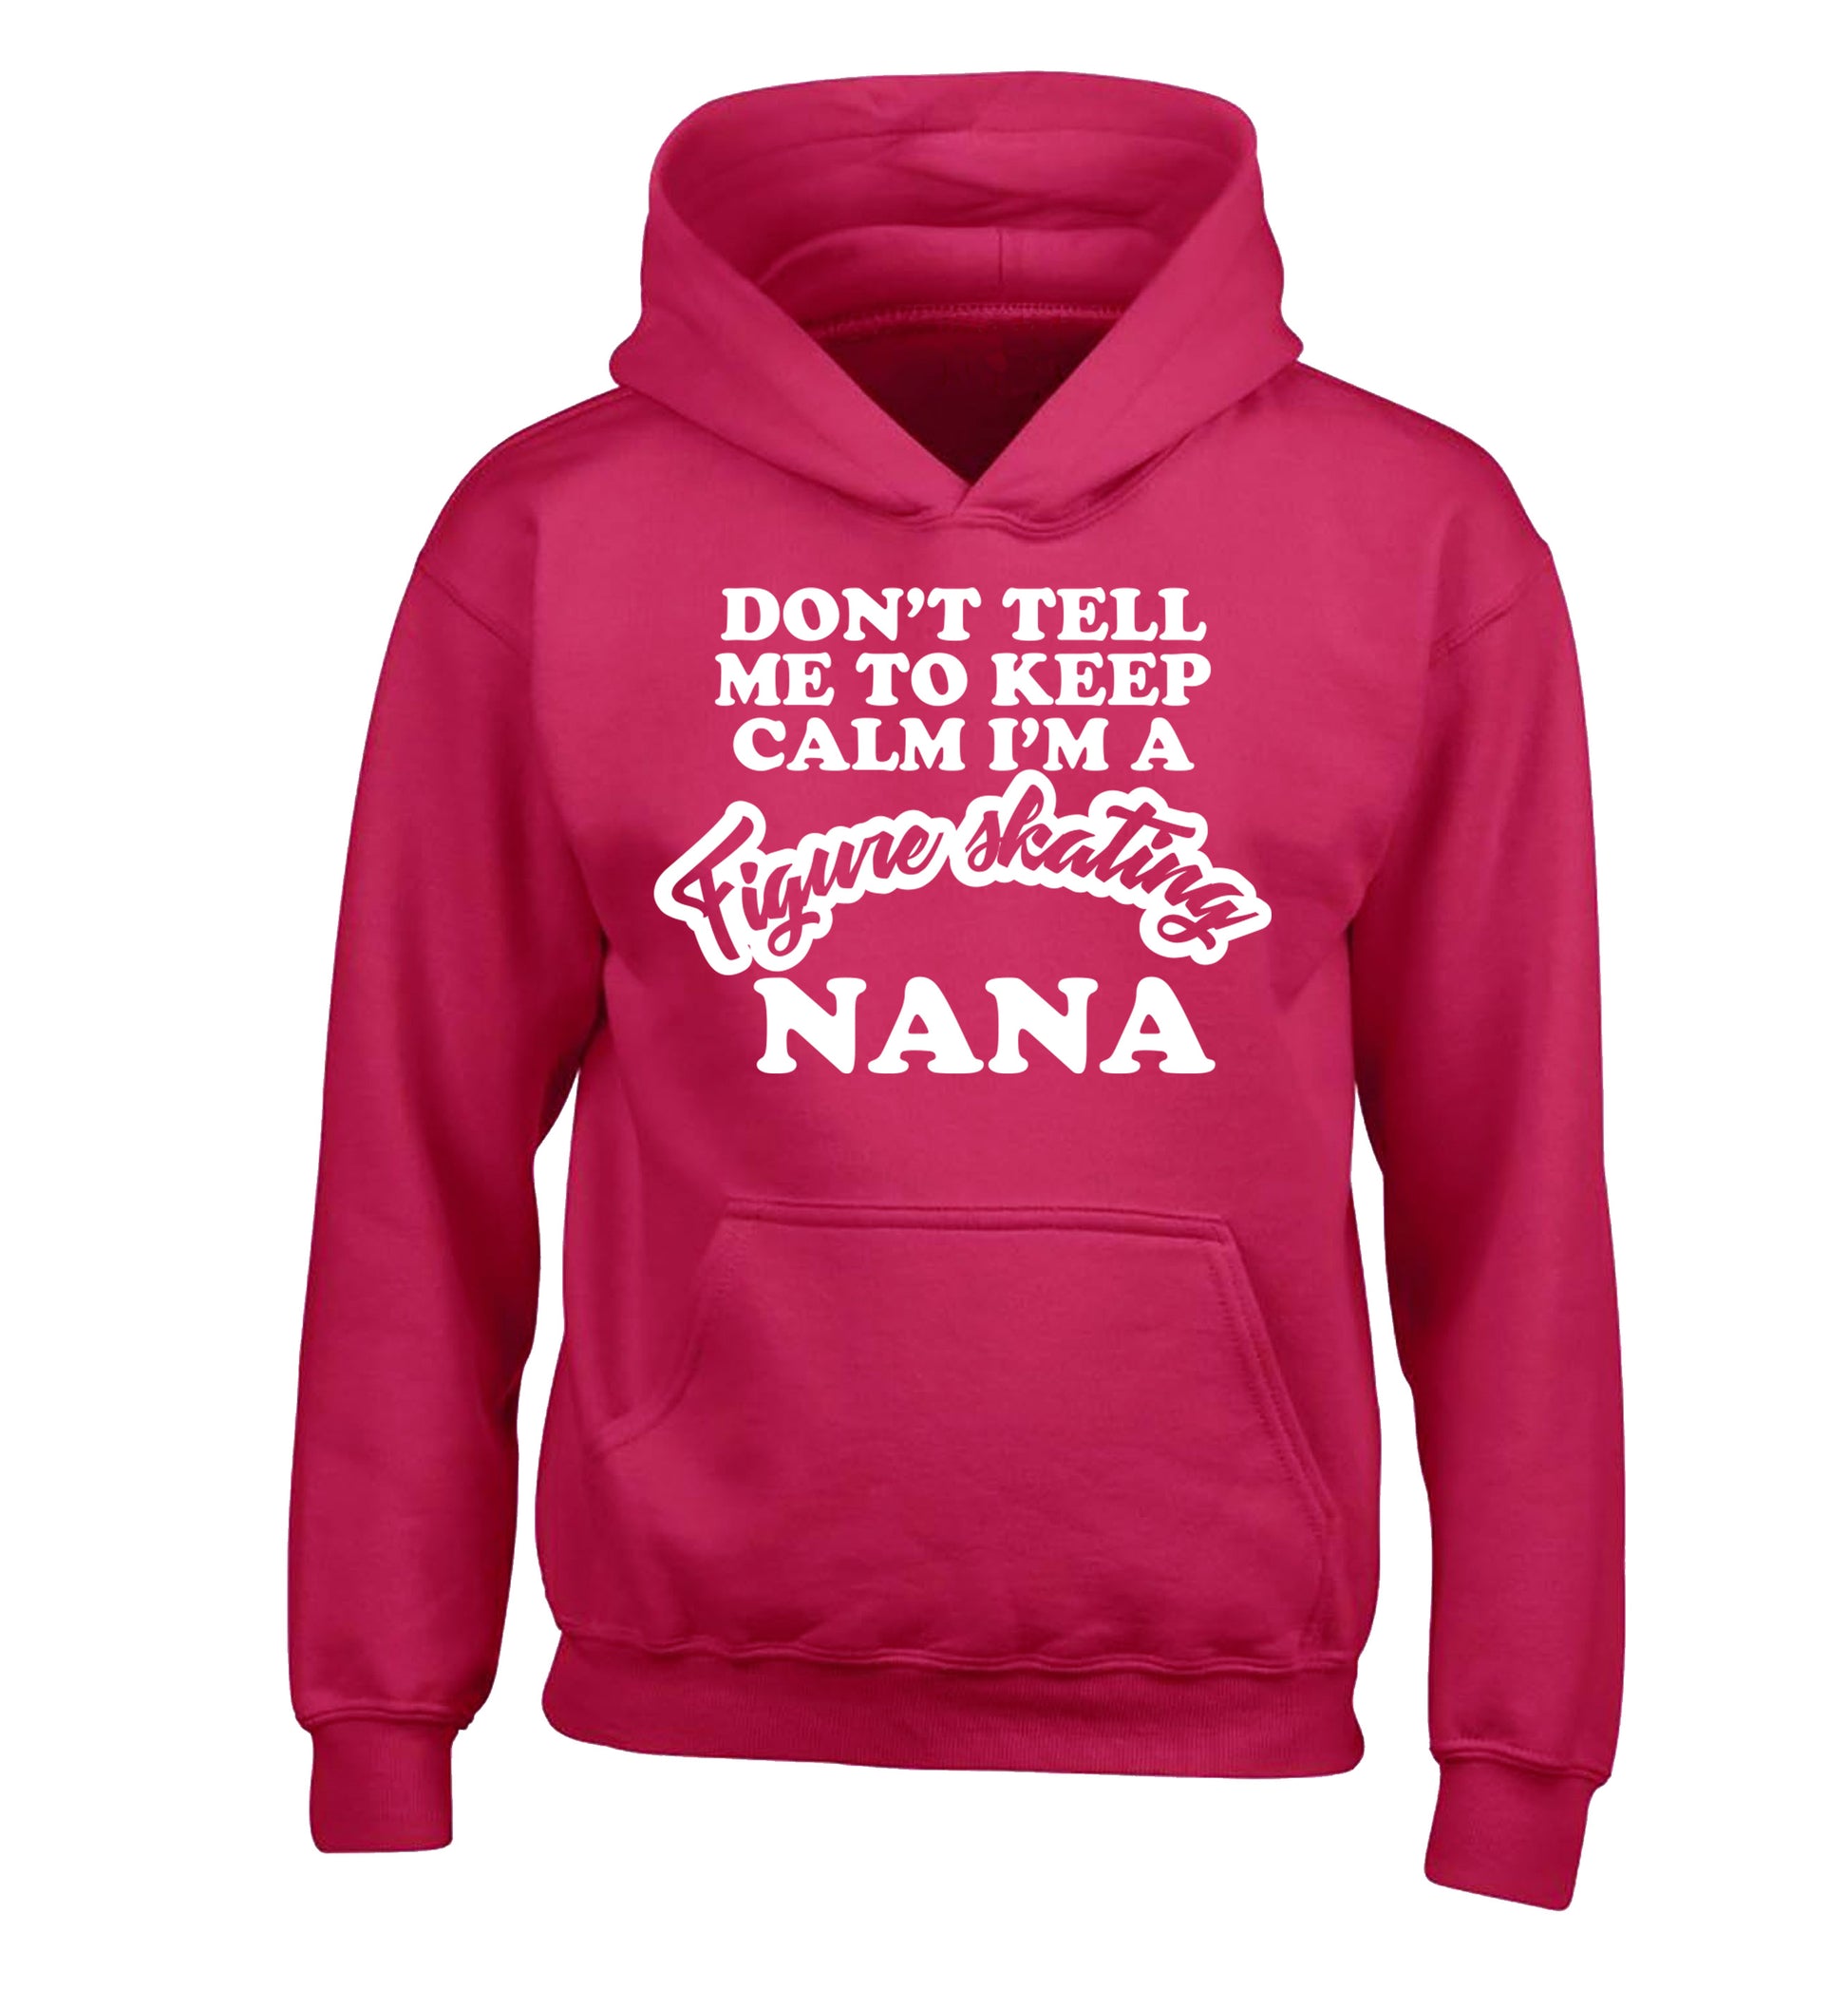 Don't tell me to keep calm I'm a figure skating nana children's pink hoodie 12-14 Years